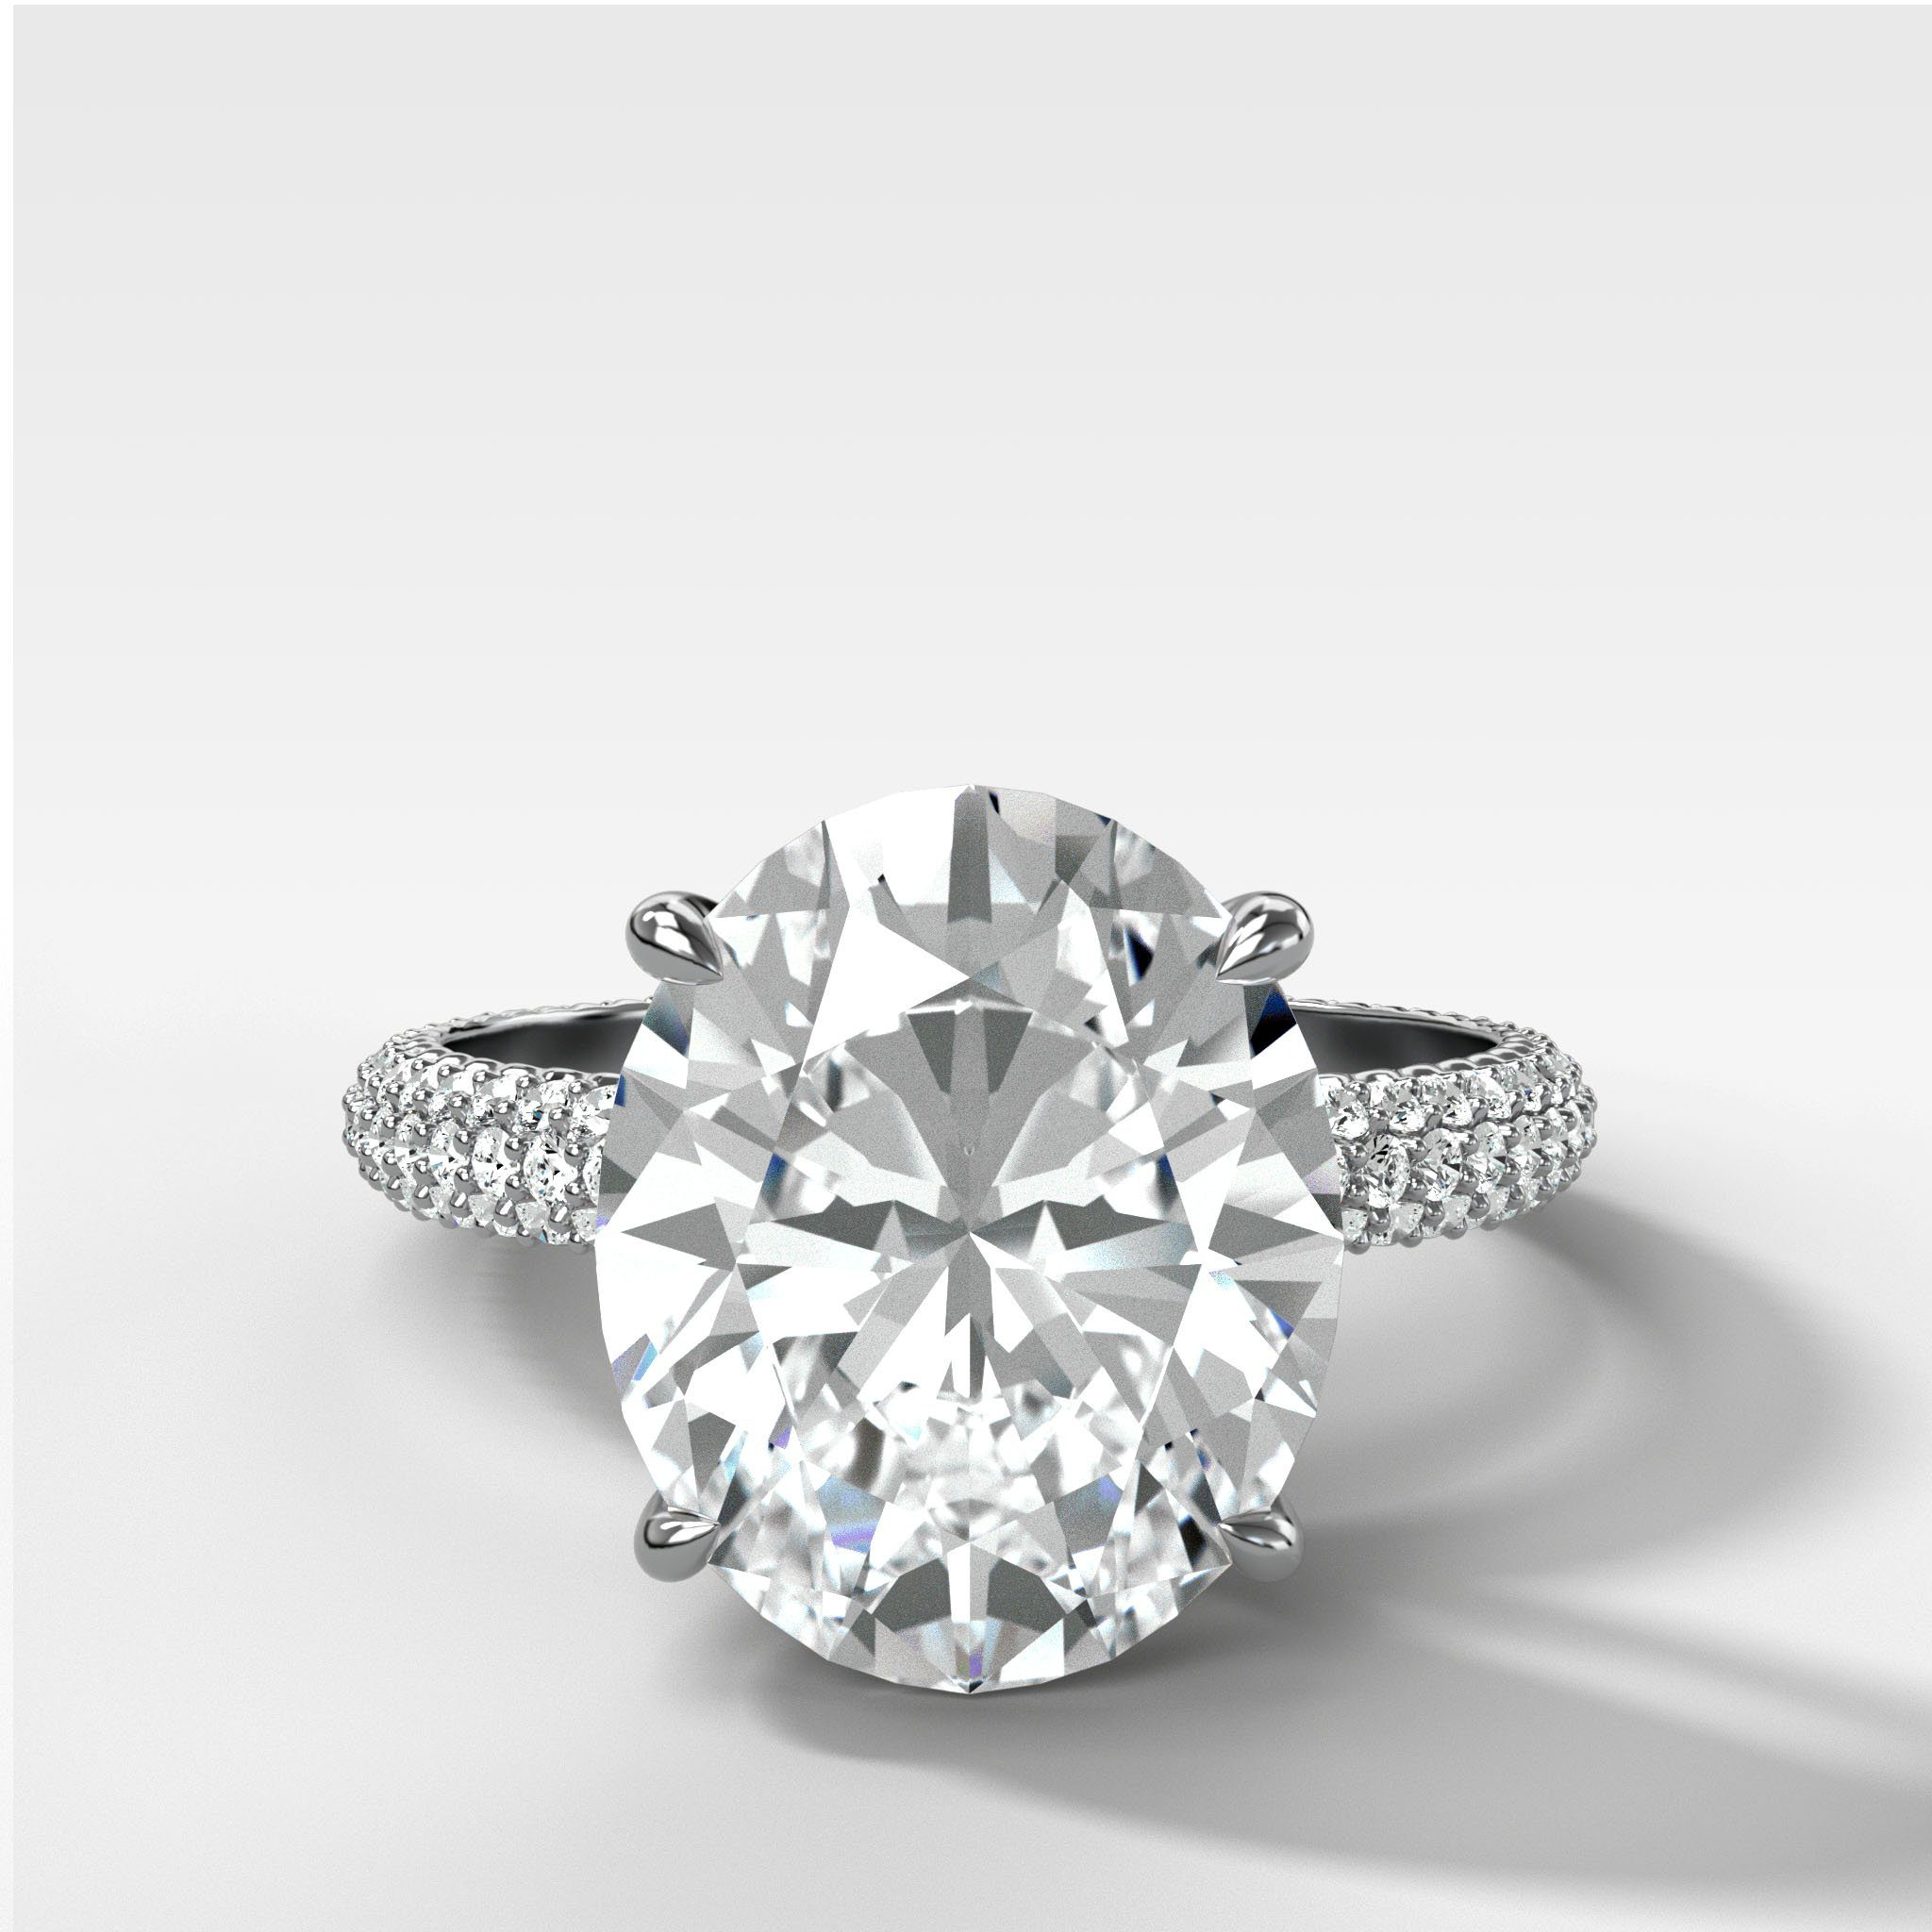 GOODSTONE Triple Row Pavé Engagement Ring With Oval Cut Diamond